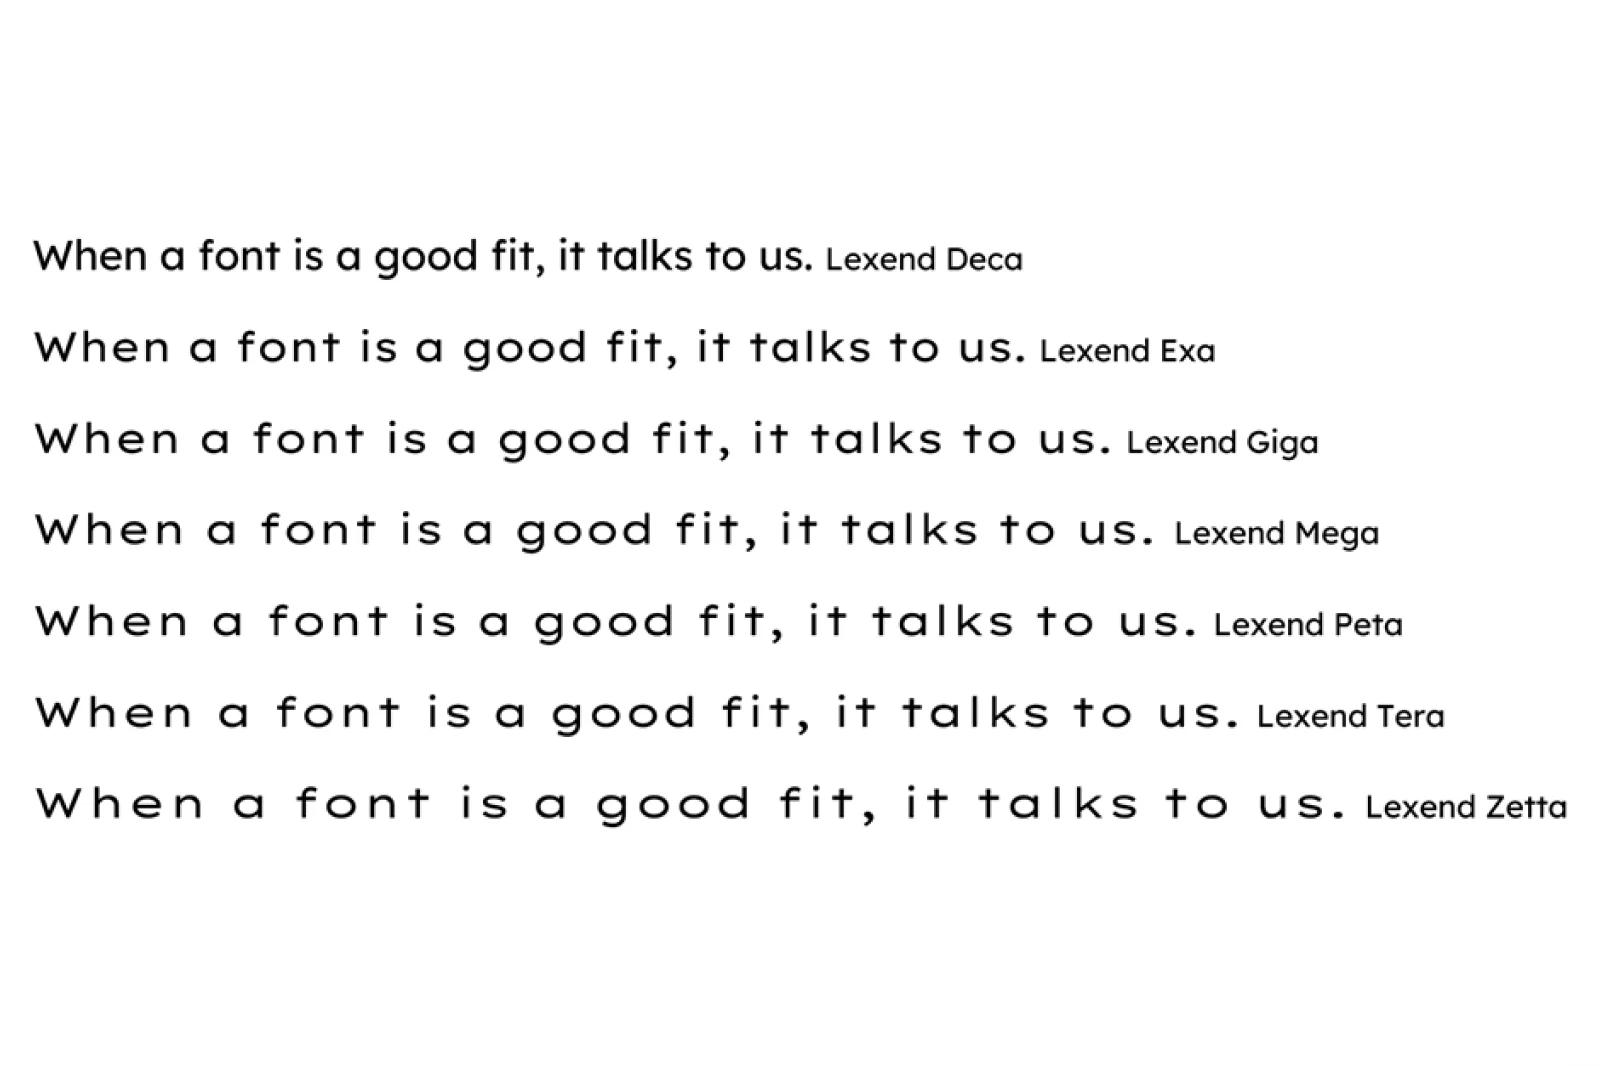 “When a font is a good fit, it talks to us” in seven styles